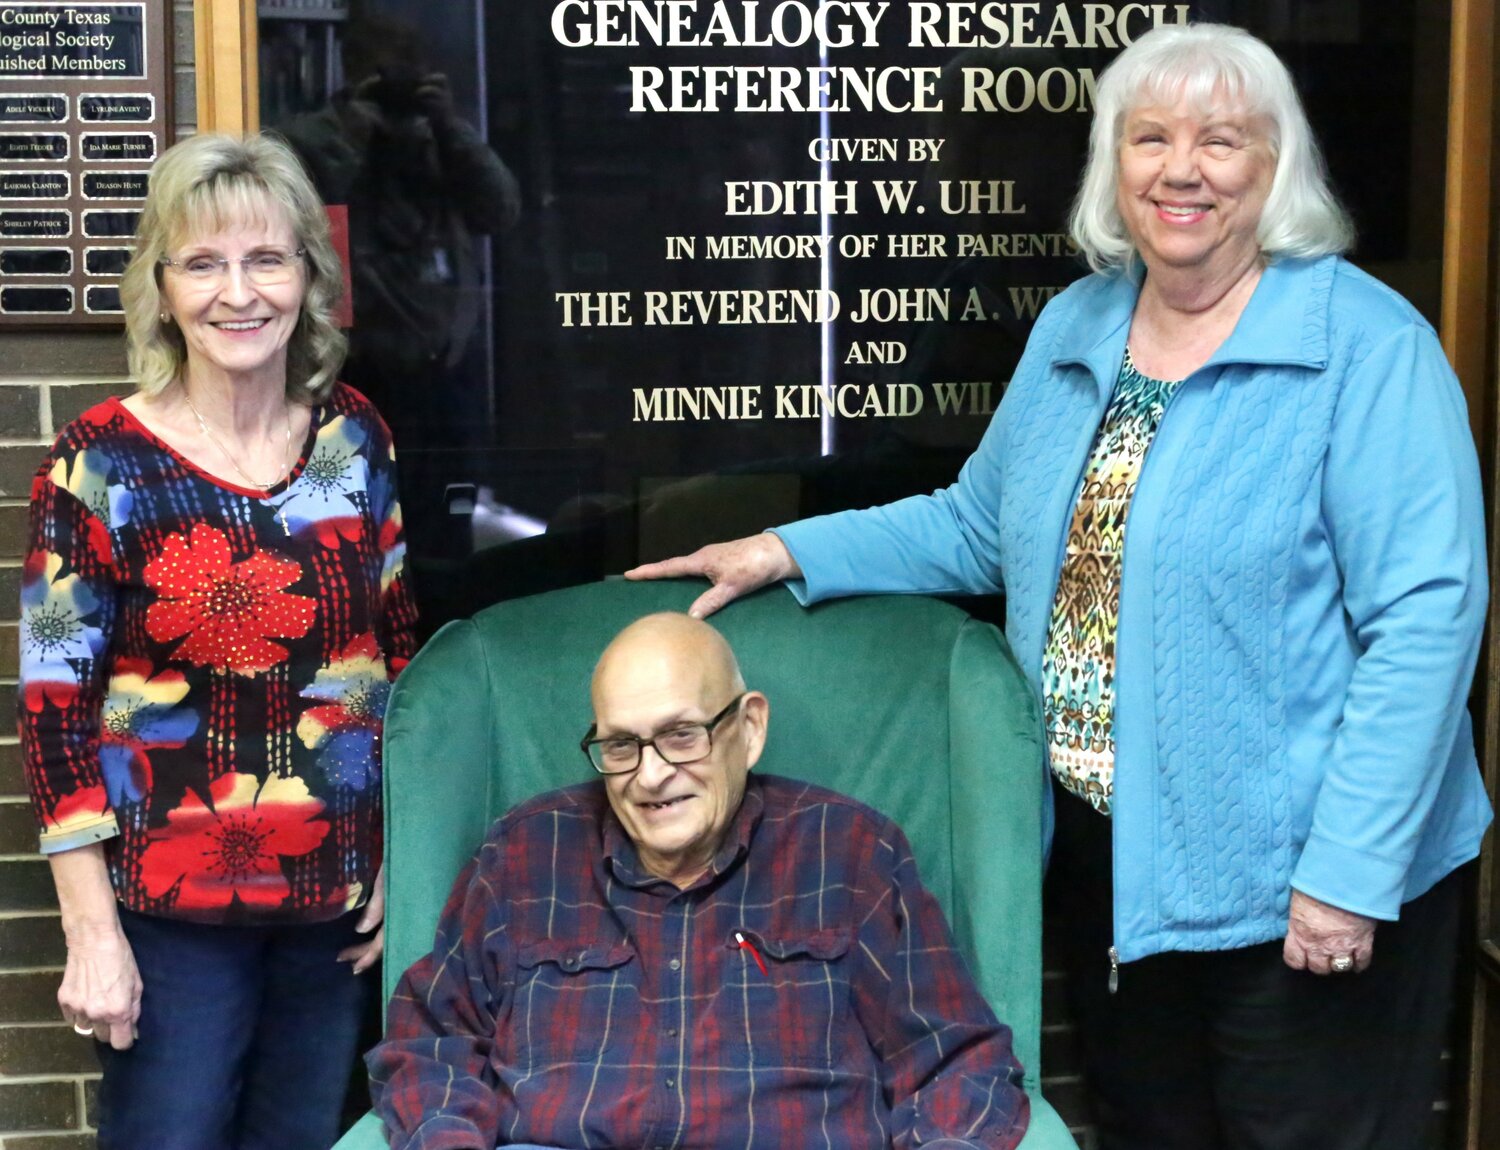 From left, Susan Few of the Daughters of the American Revolution, and Deason Hunt and Karen Pilgrim of the Wood County Genealogical Society, at the Quitman Public Library.